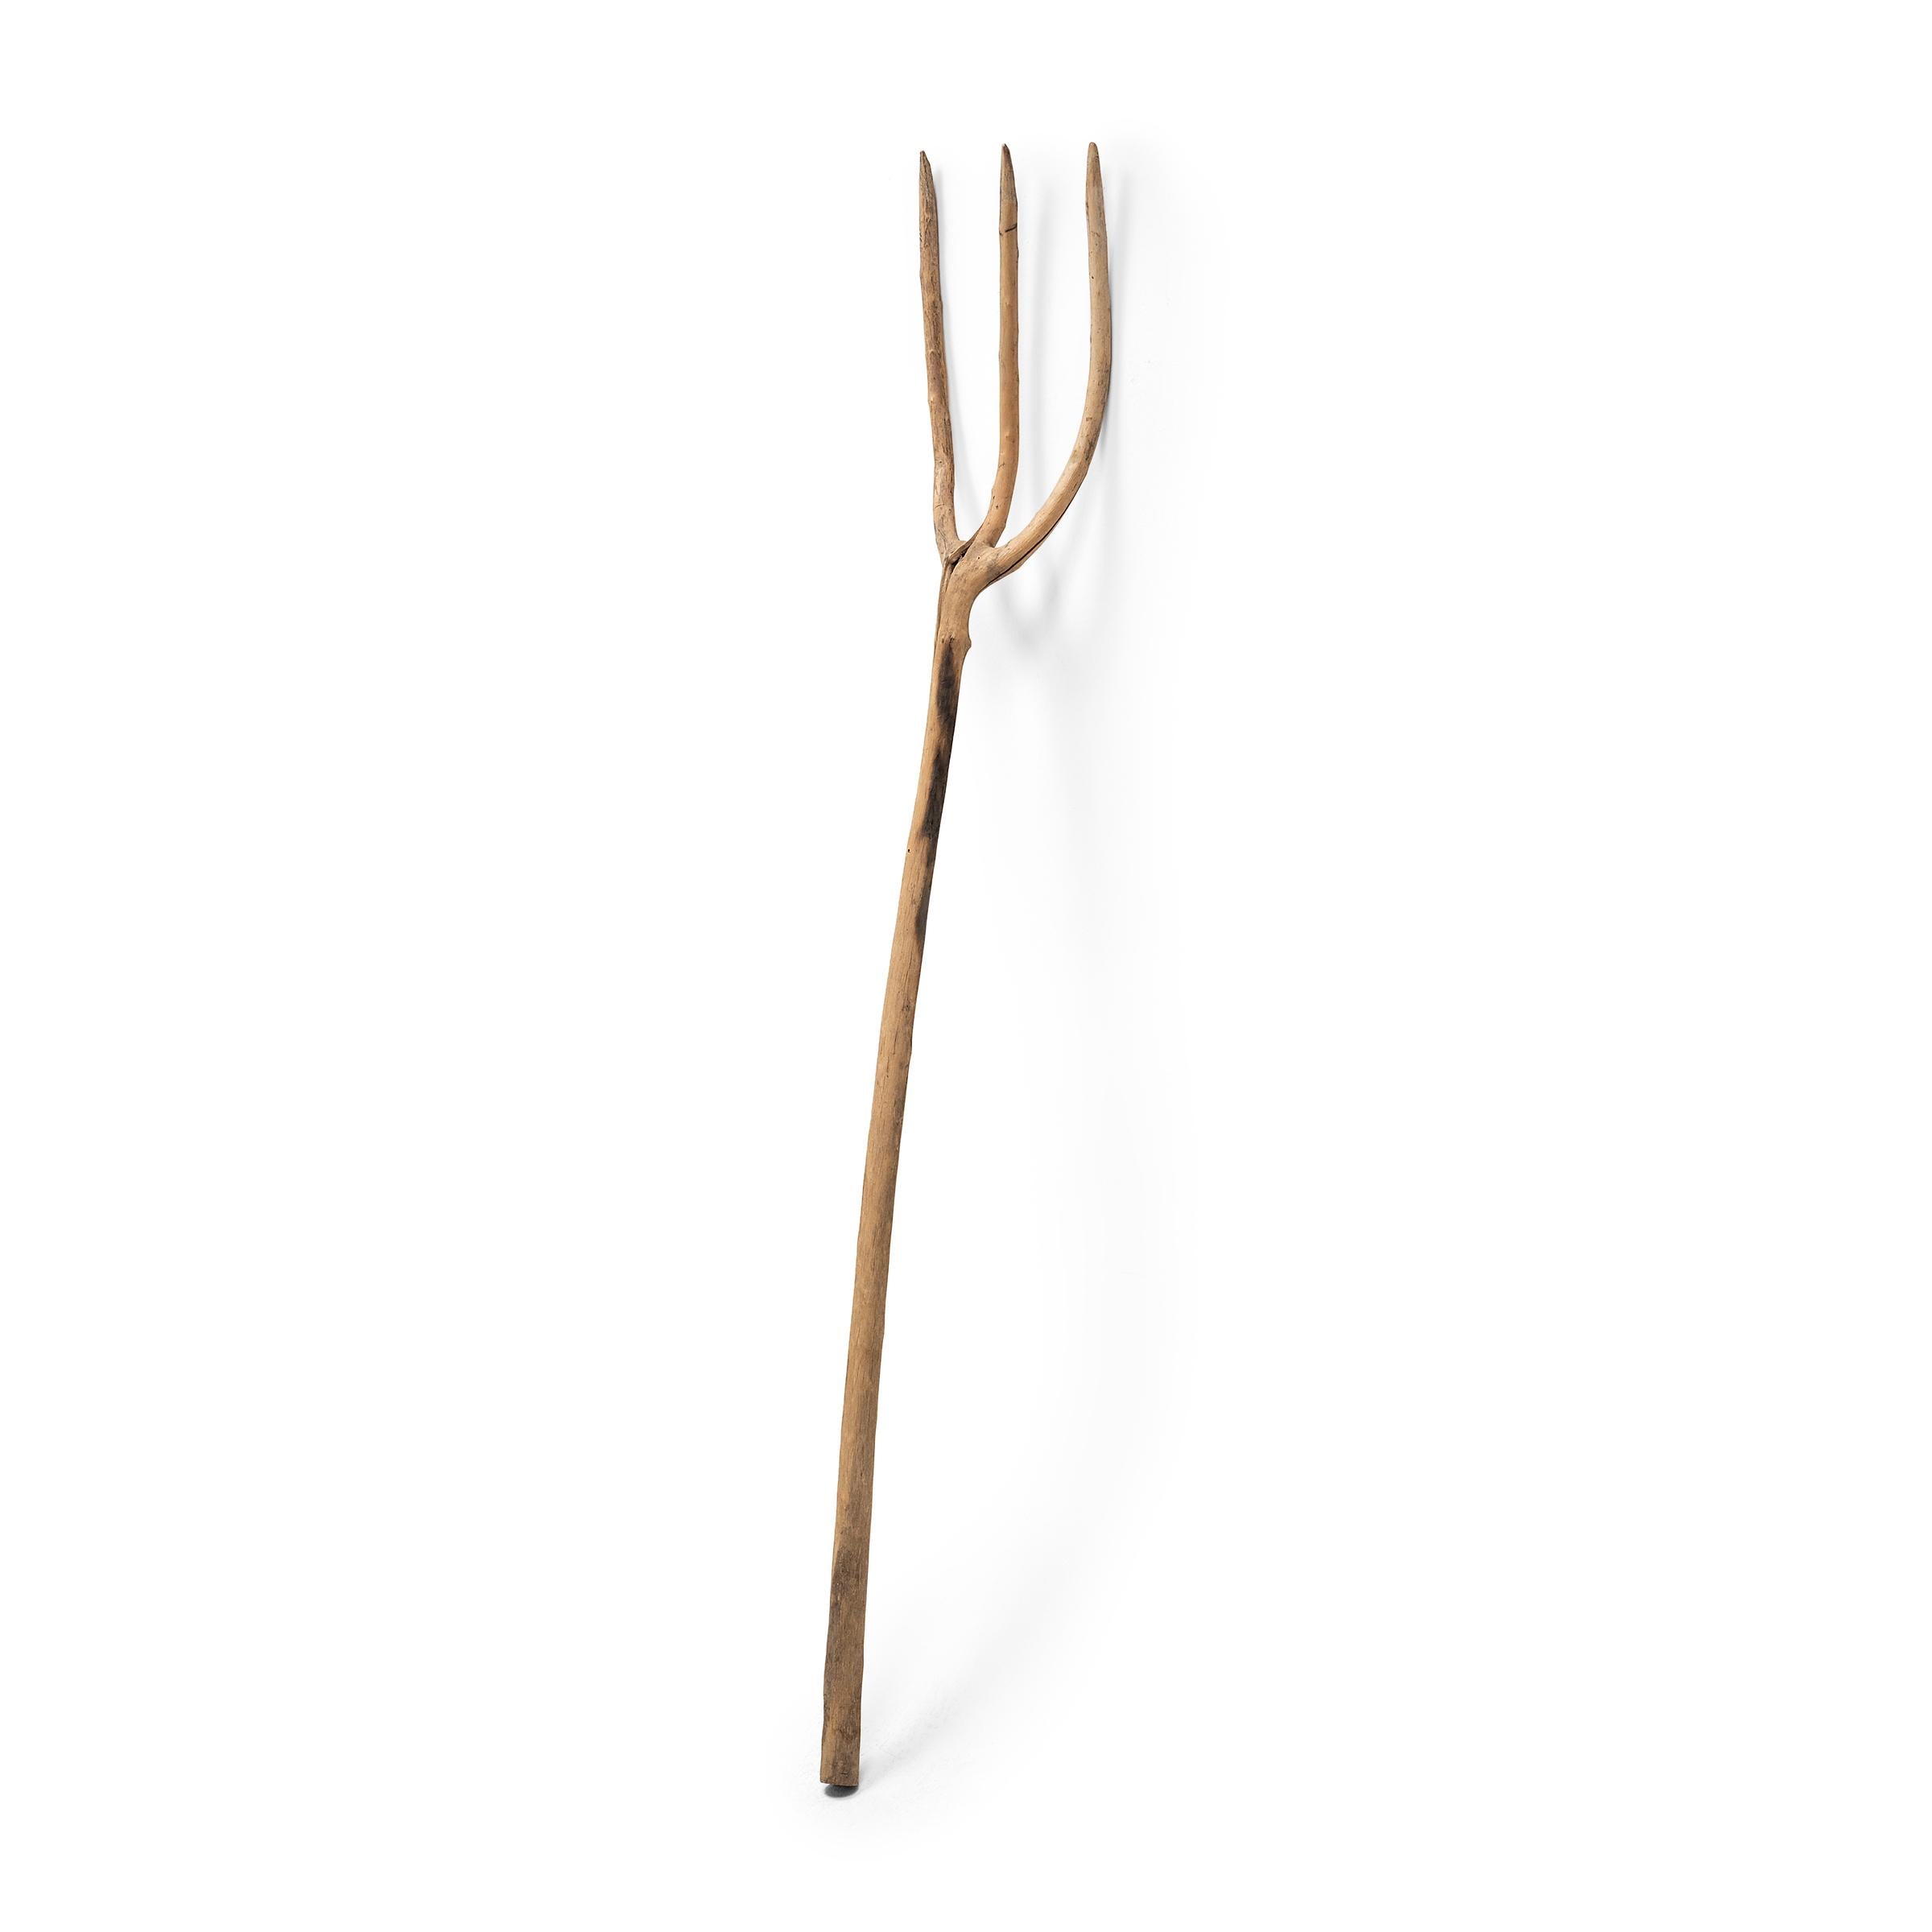 This provincial pitchfork from China’s Shanxi province was crafted in the 19th century and consists of a single, continuous piece of wood. By controlling its growth as a young plant, the farmer or gardener was able to bend and sculpt a tree